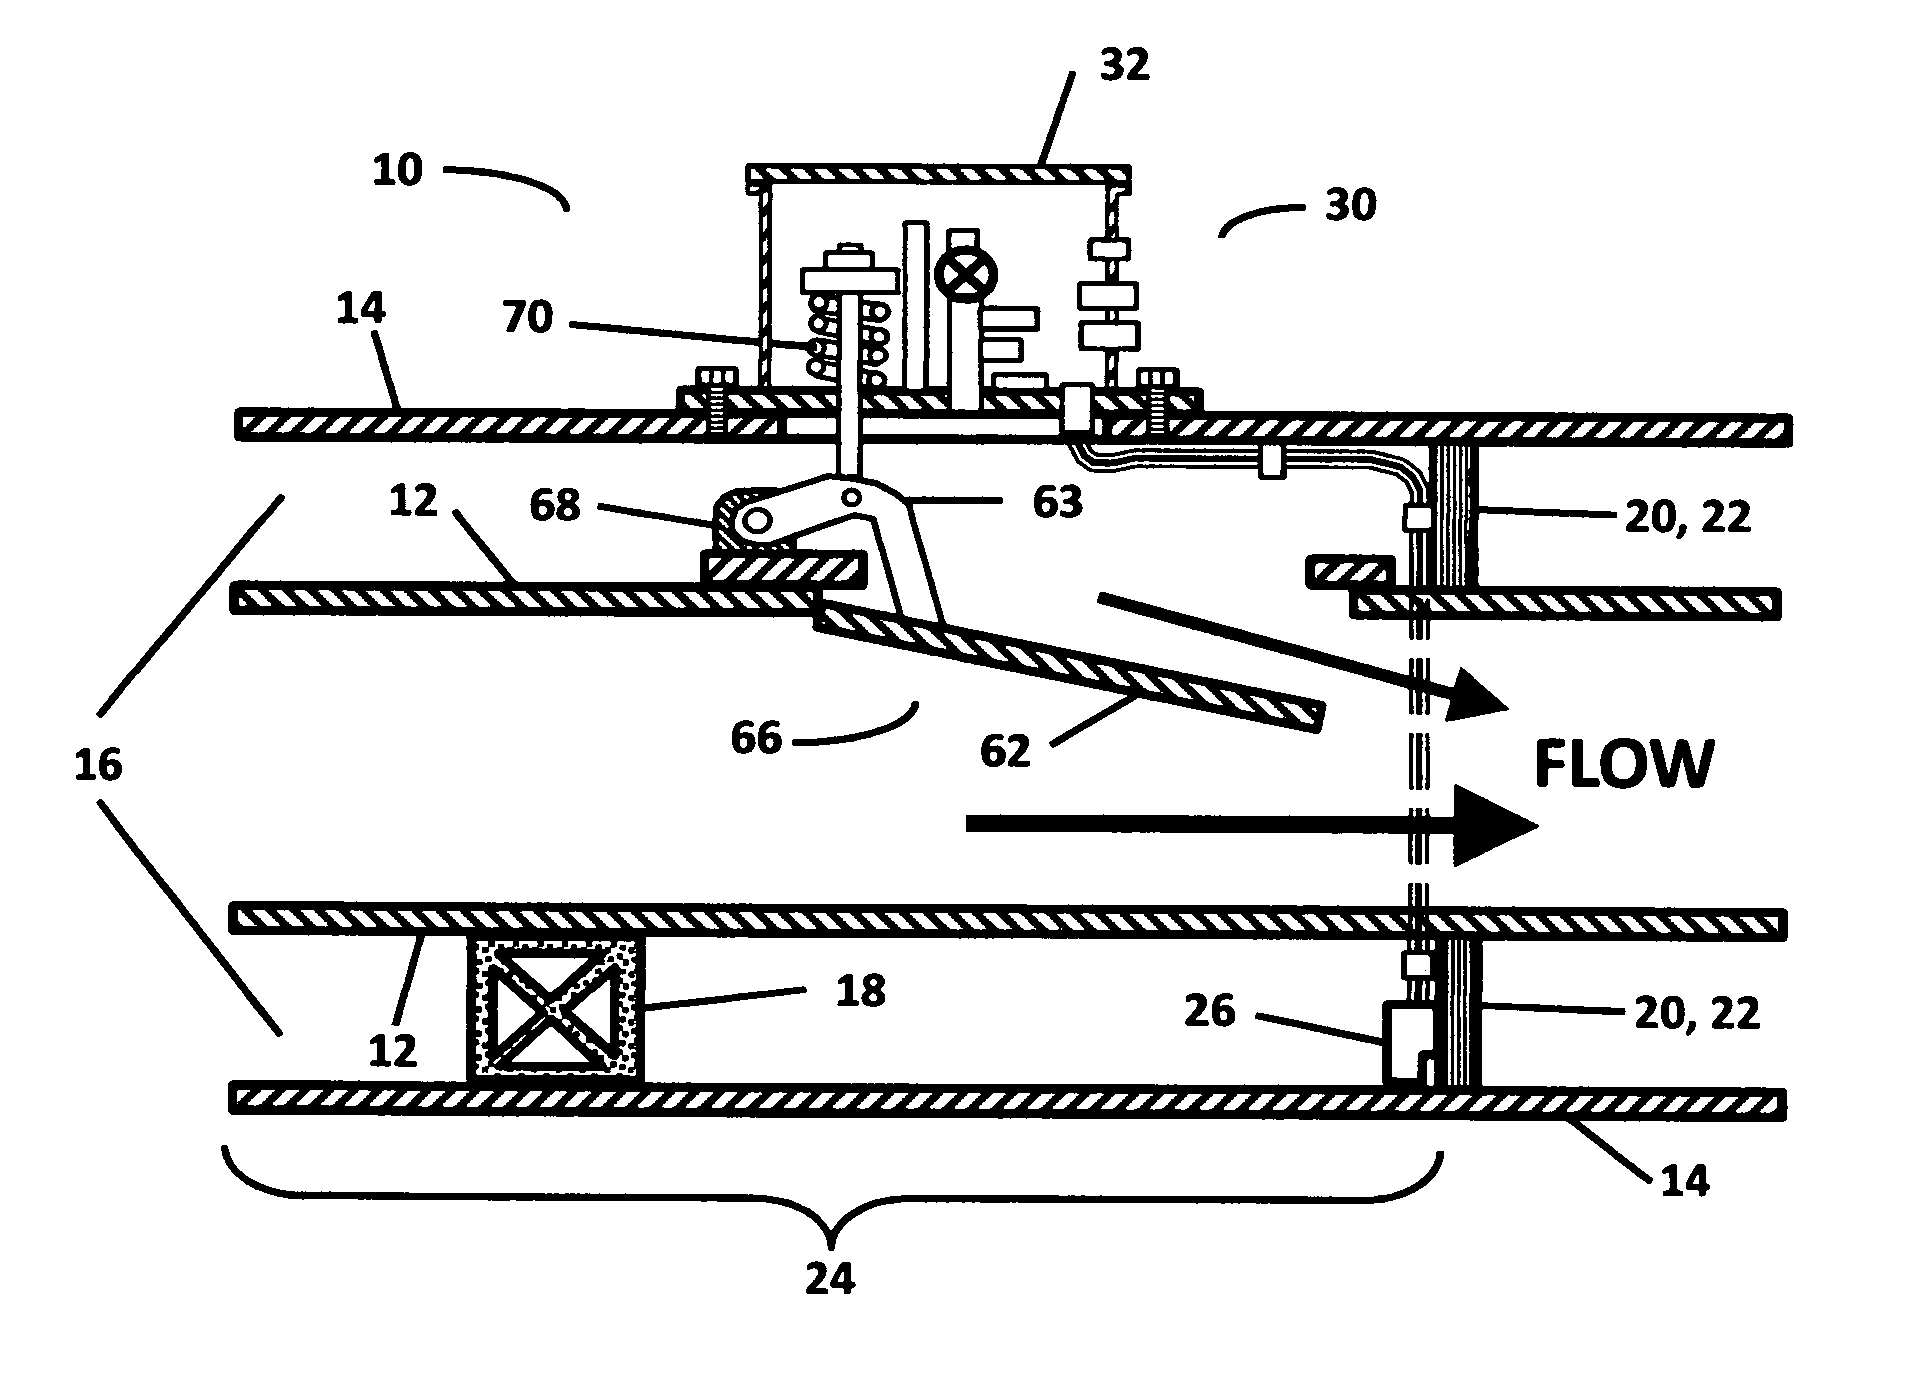 Fluid spill containment, location, and real time notification device and system